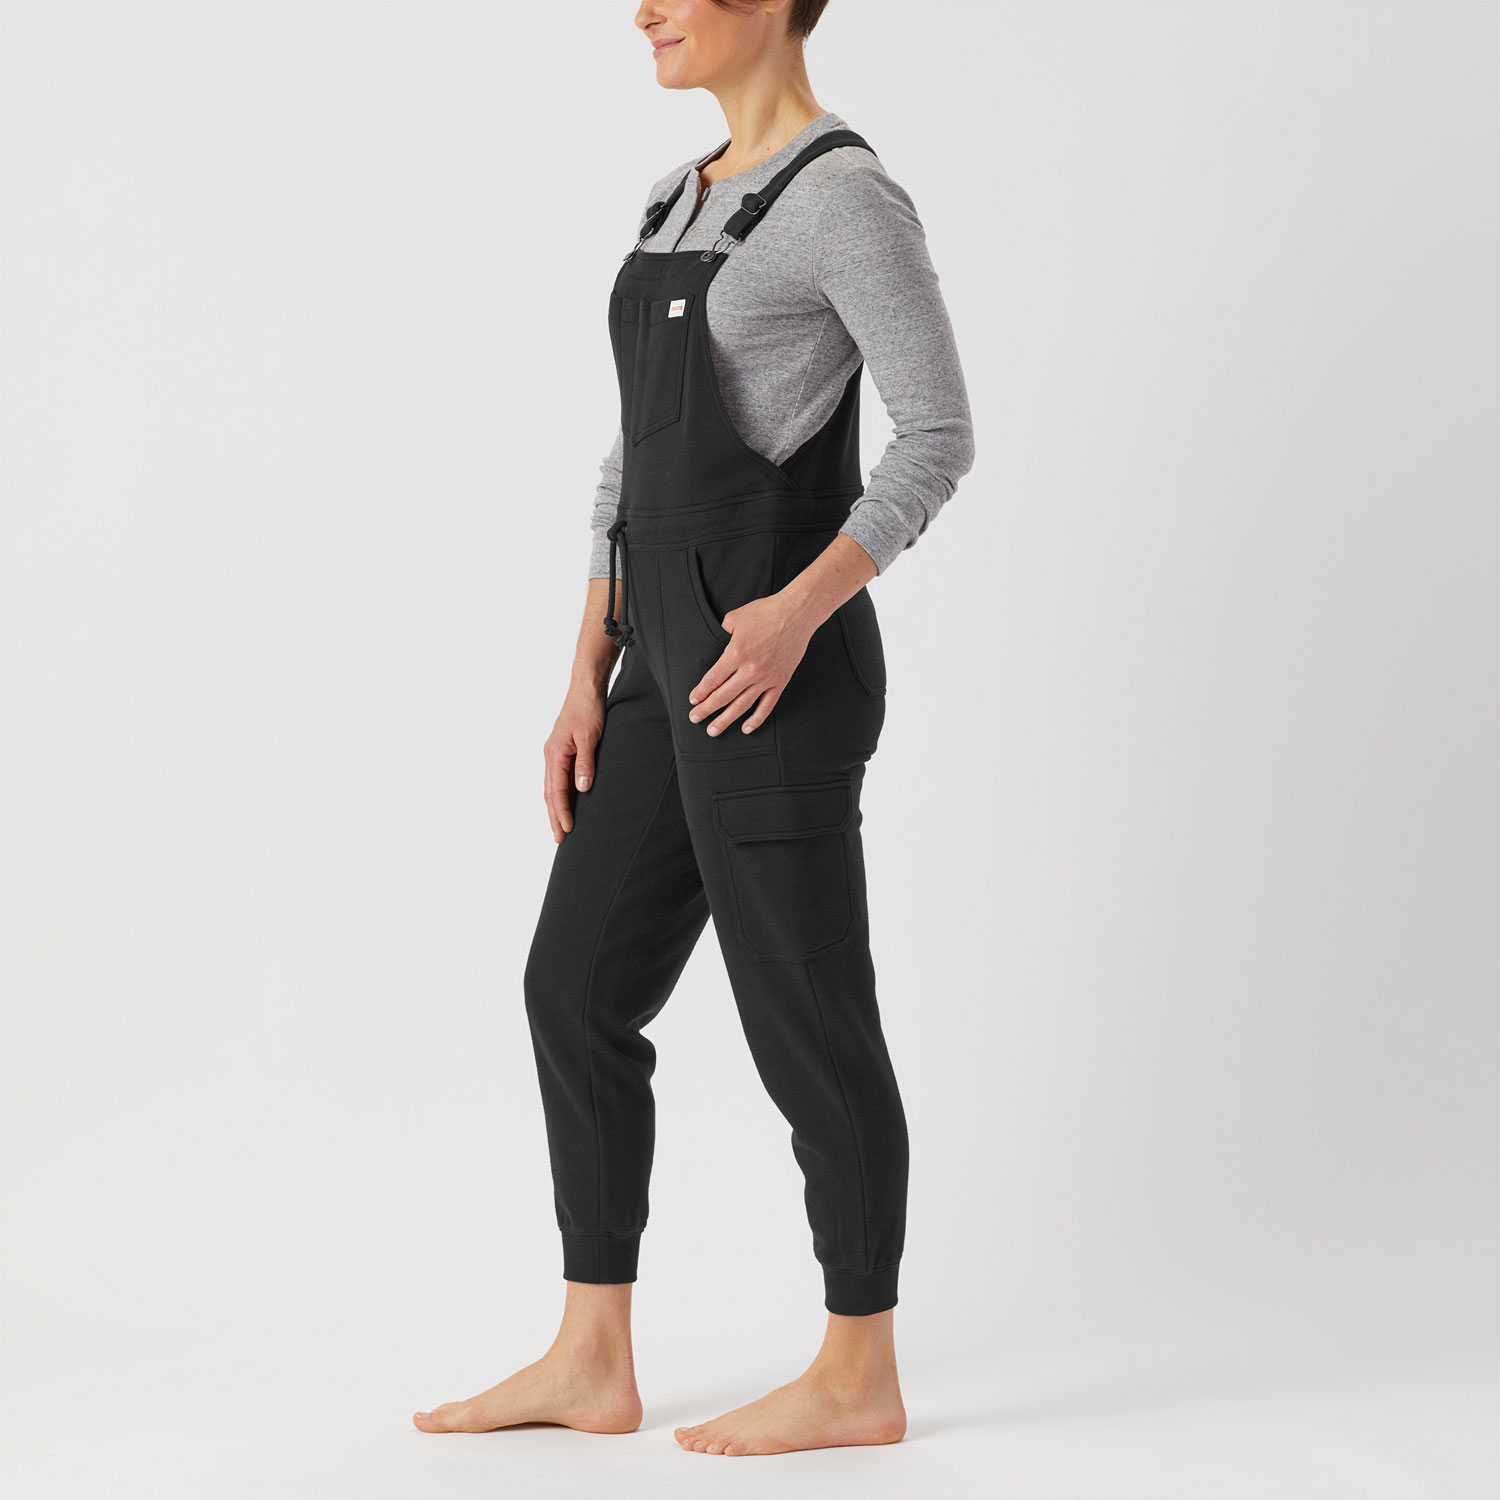 Women's Souped-Up Sweats with Storm Cotton Overalls